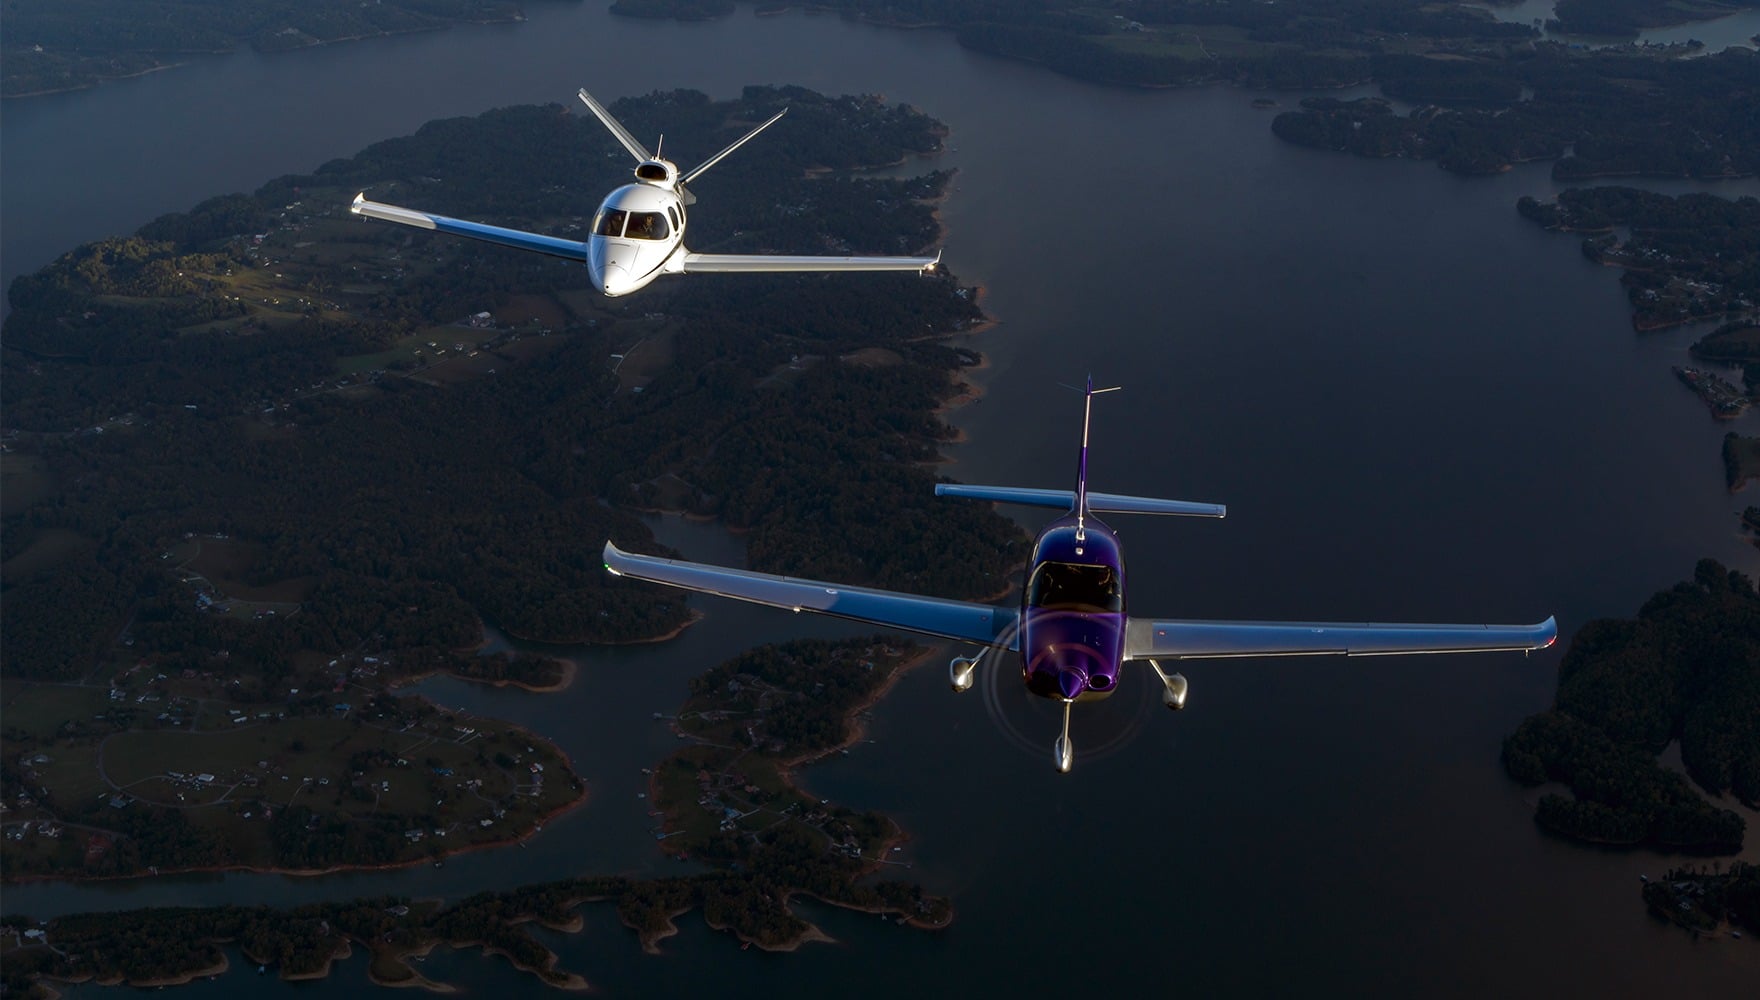 Cirrus Aircraft Expands Services Offerings and adds new Cirrus IQ features to Enhance the Ownership Experience